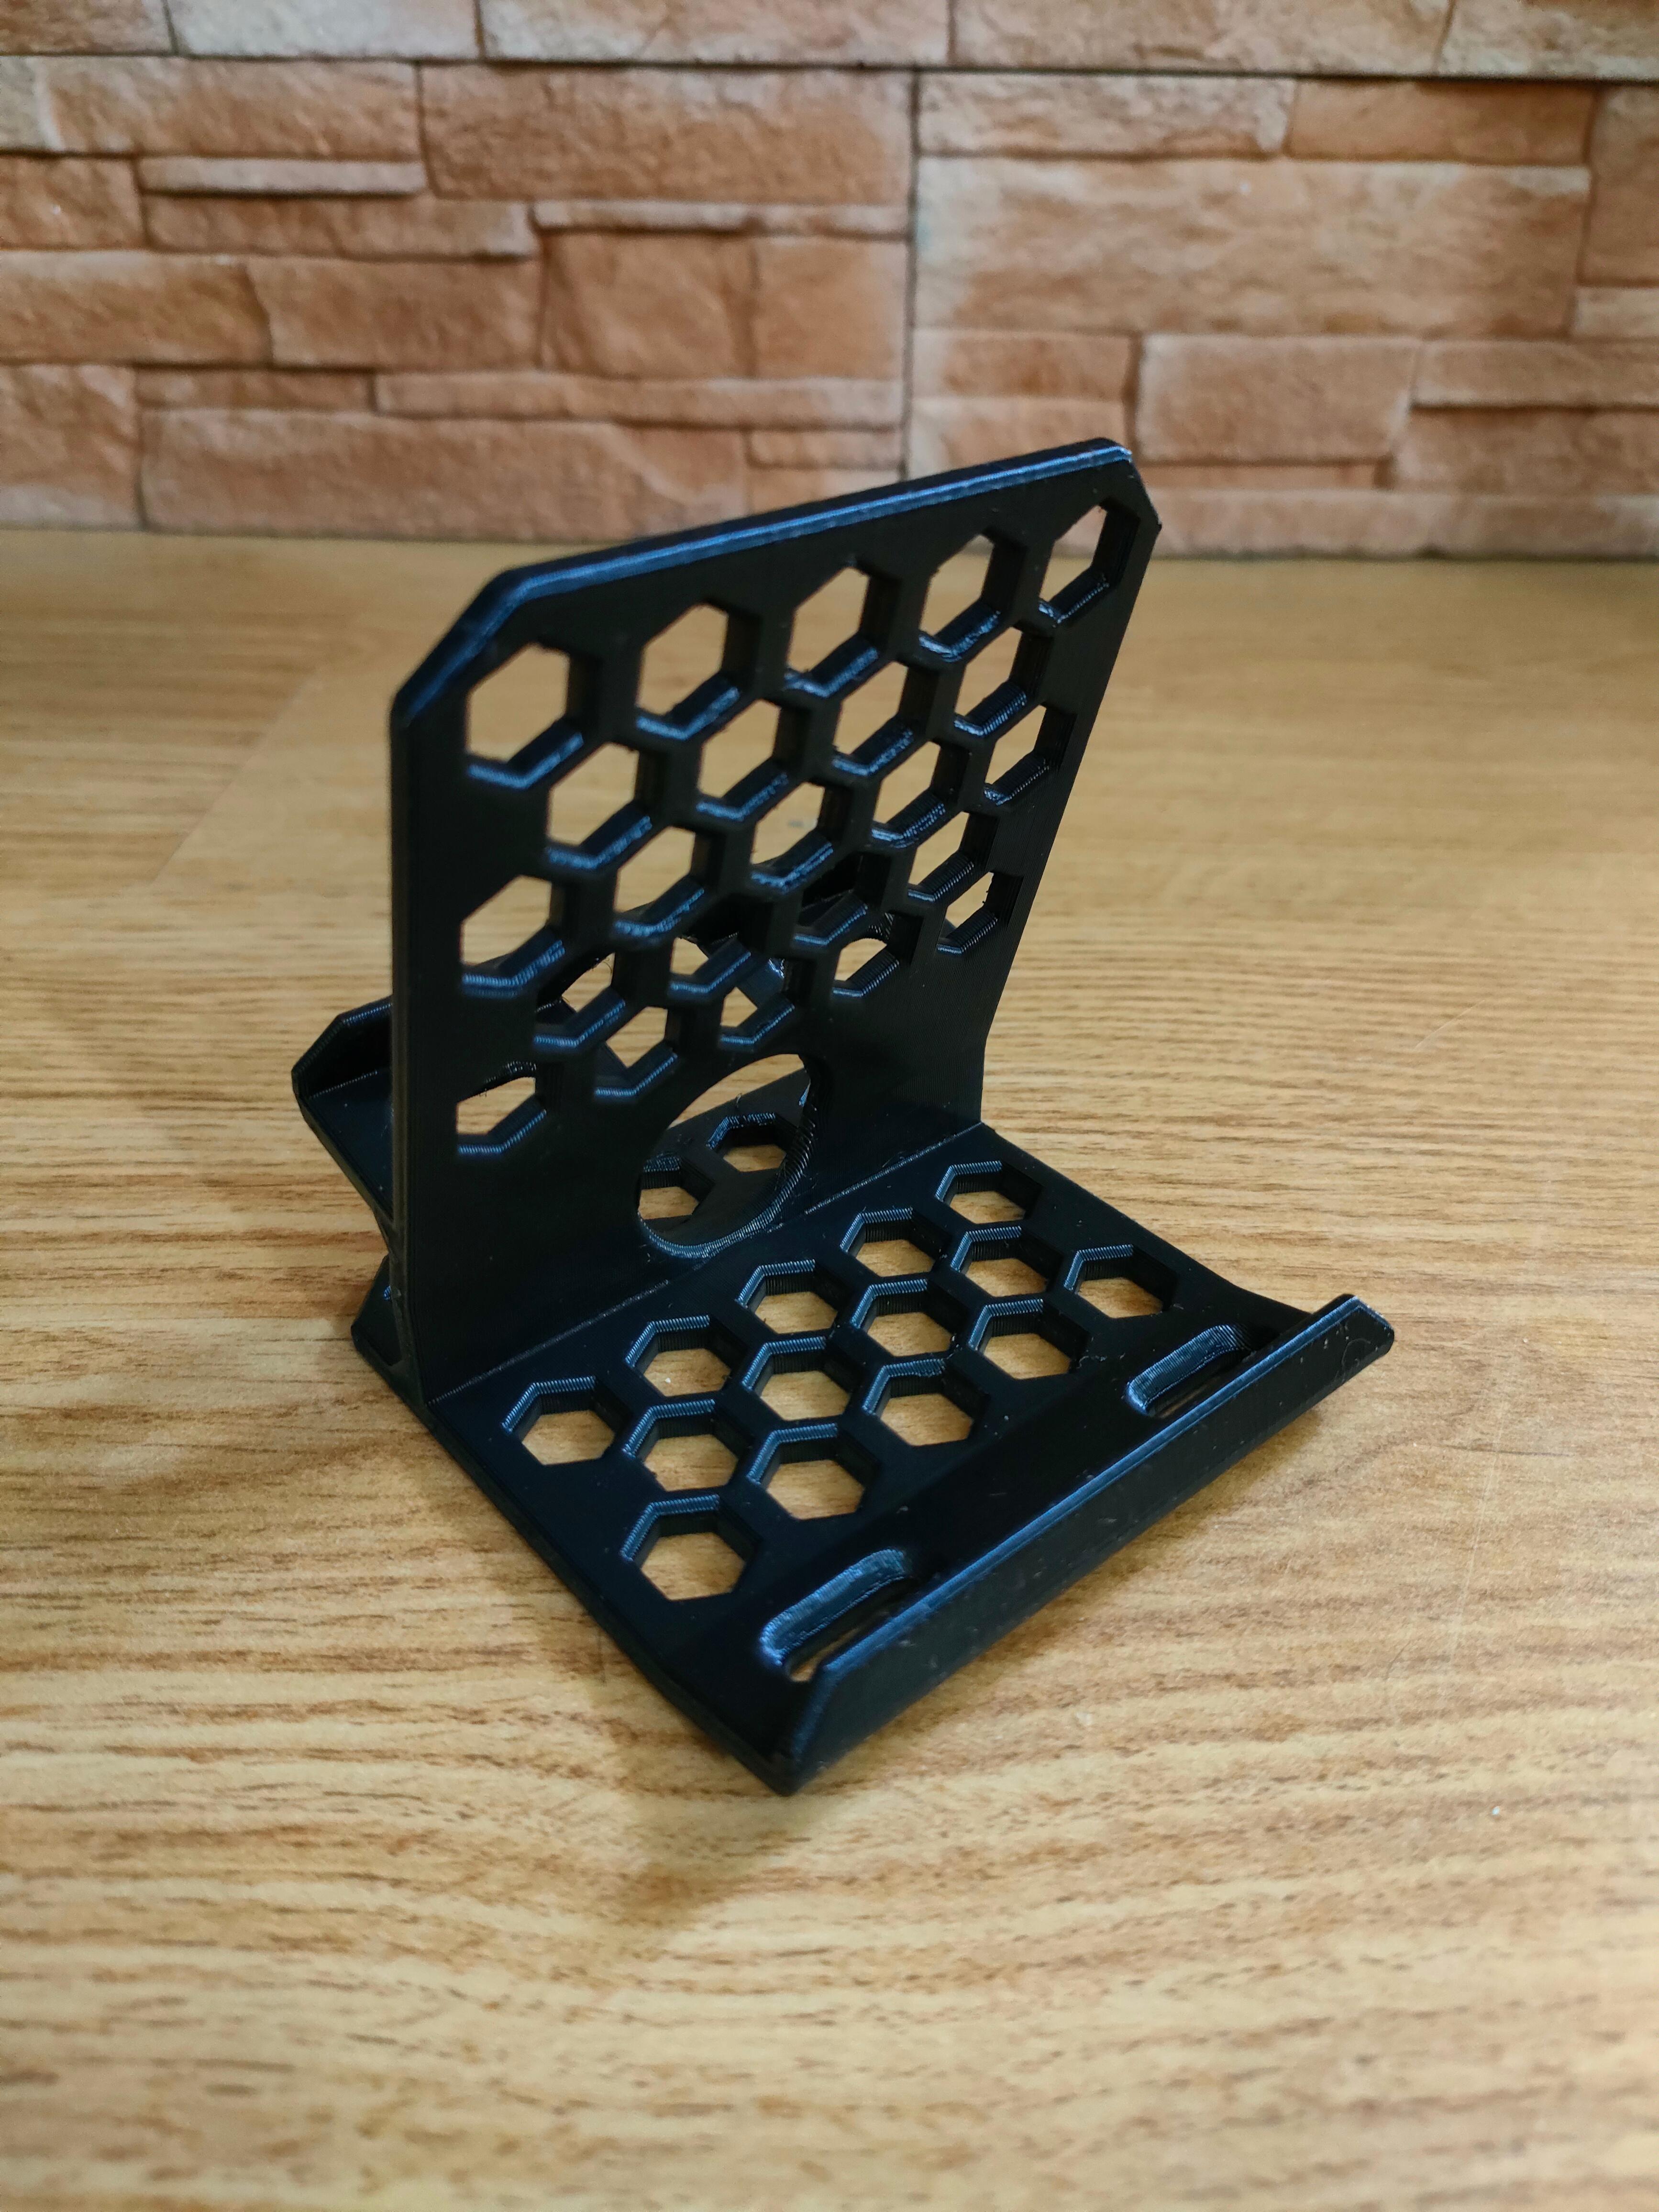 Phone stands-multiple versions 3d model